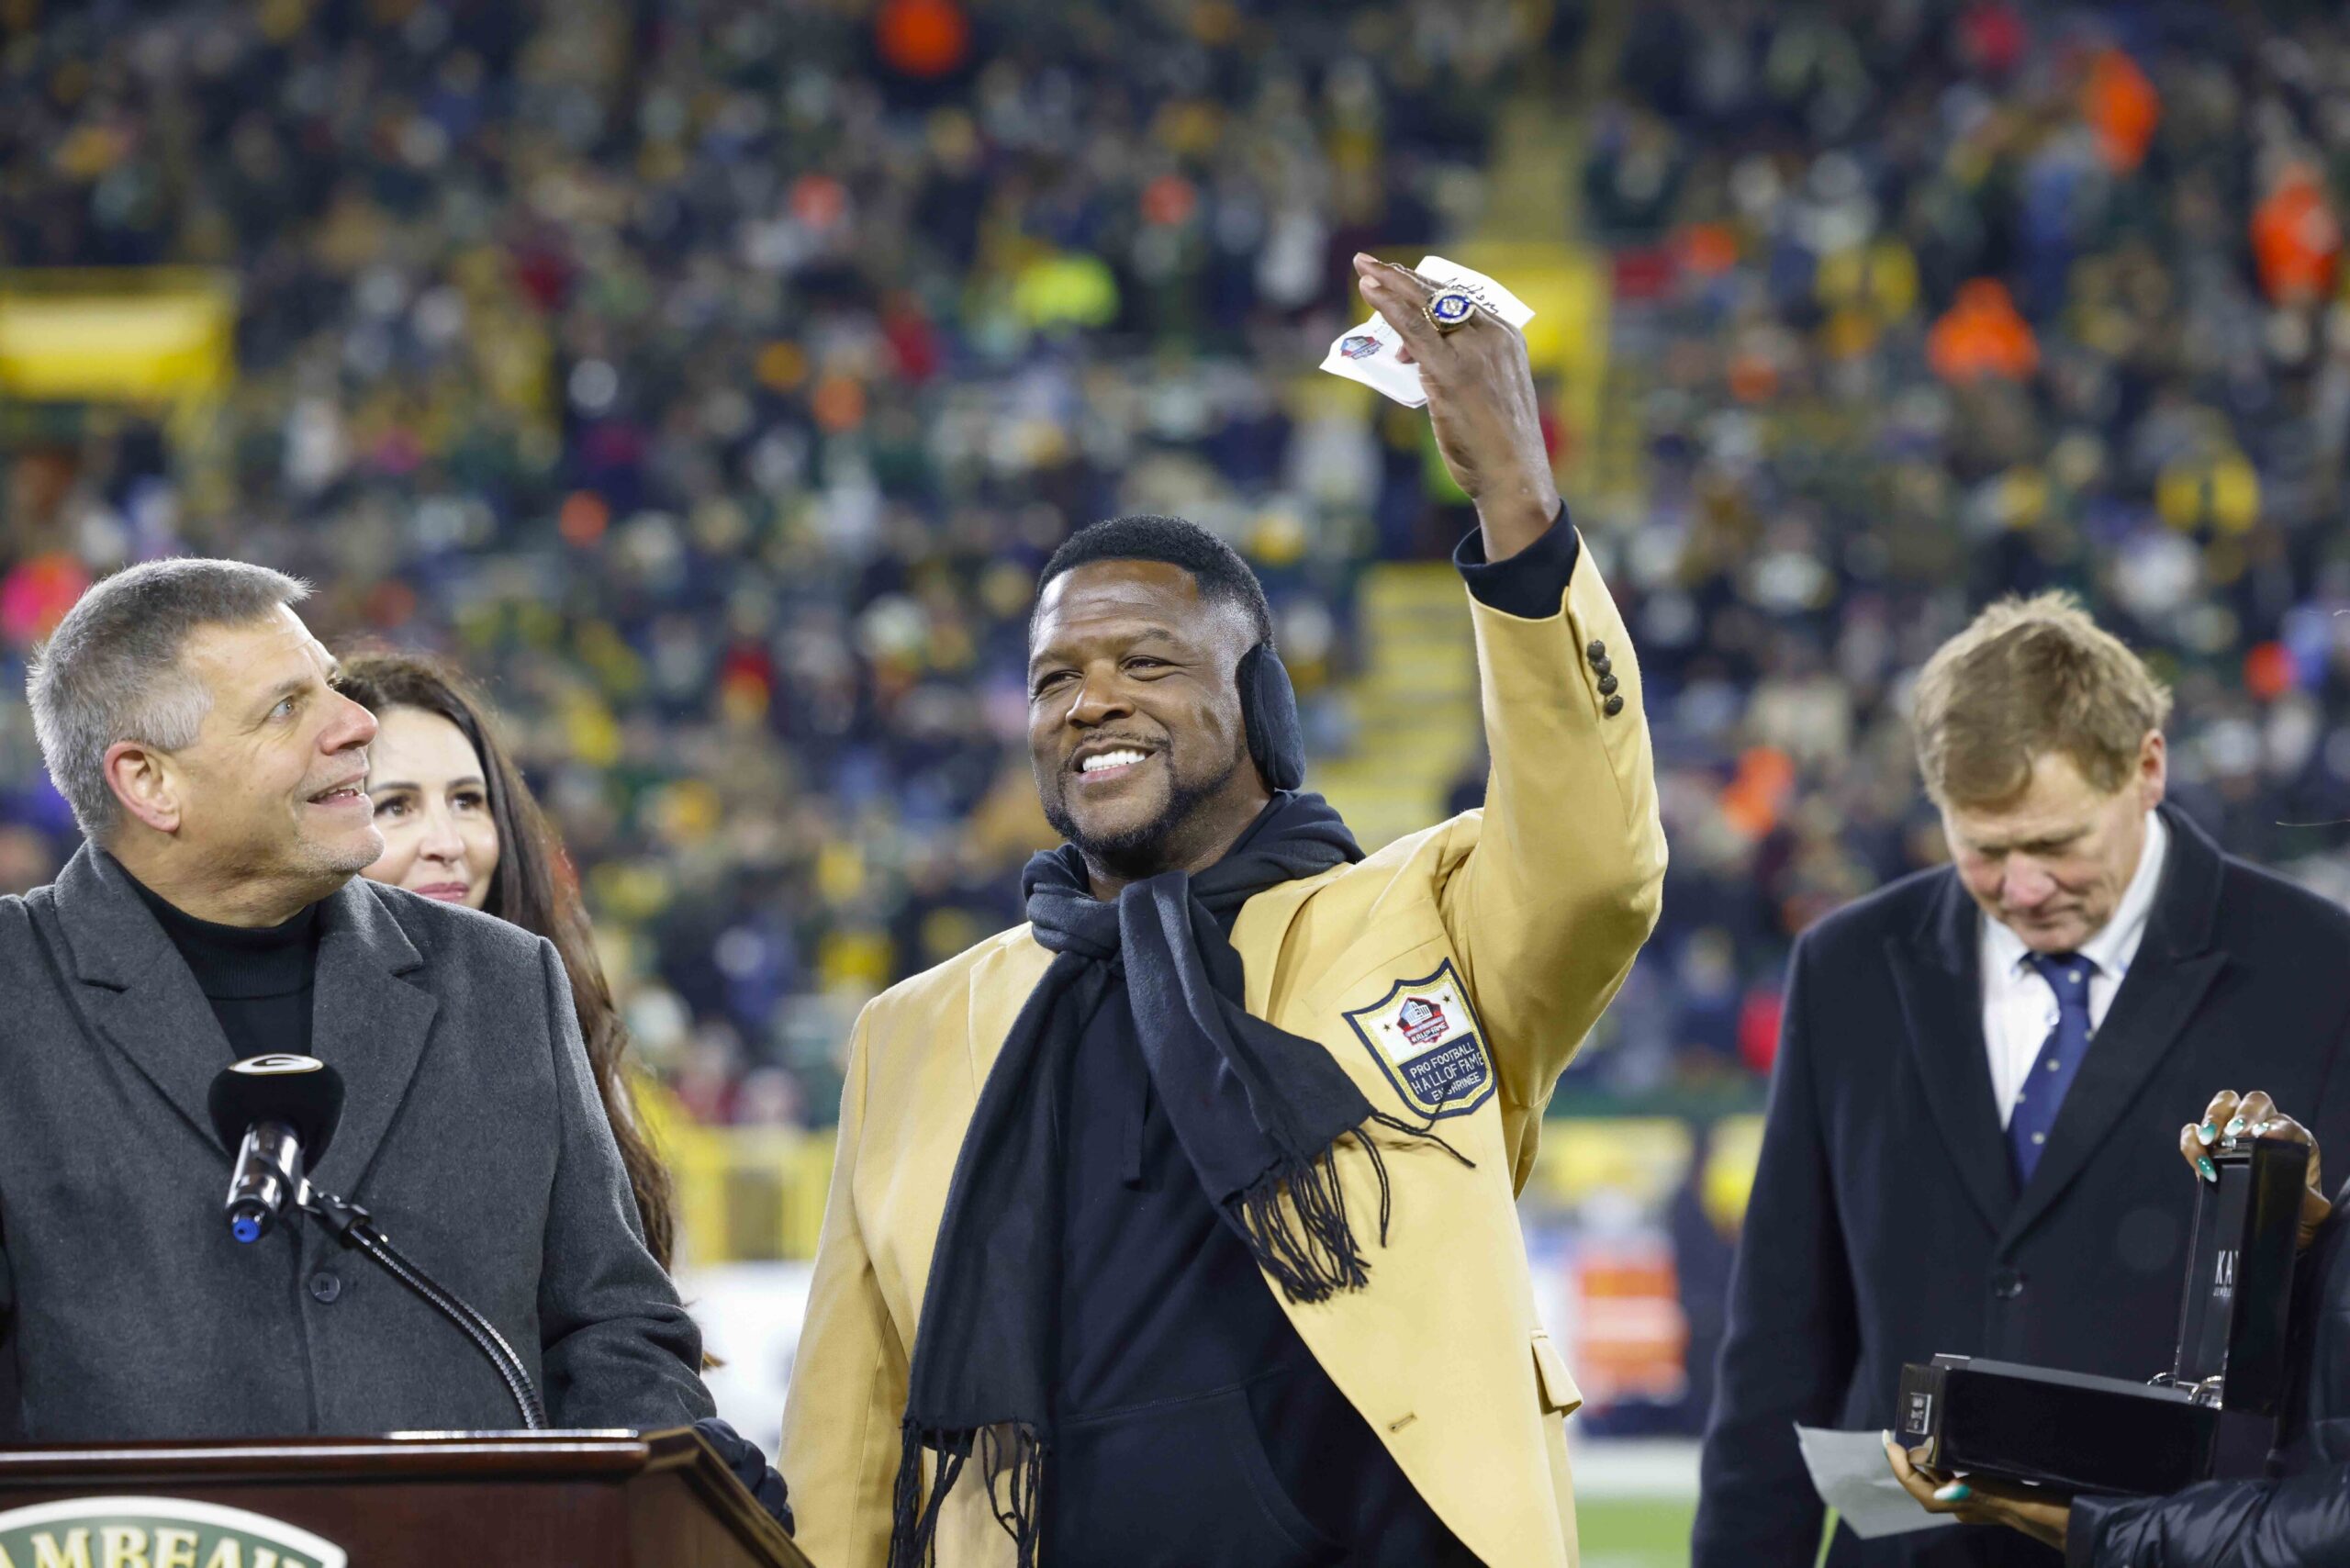 LeRoy Butler holds up a hand featuring a Super Bowl ring in front of a crowd at Lambeau Field